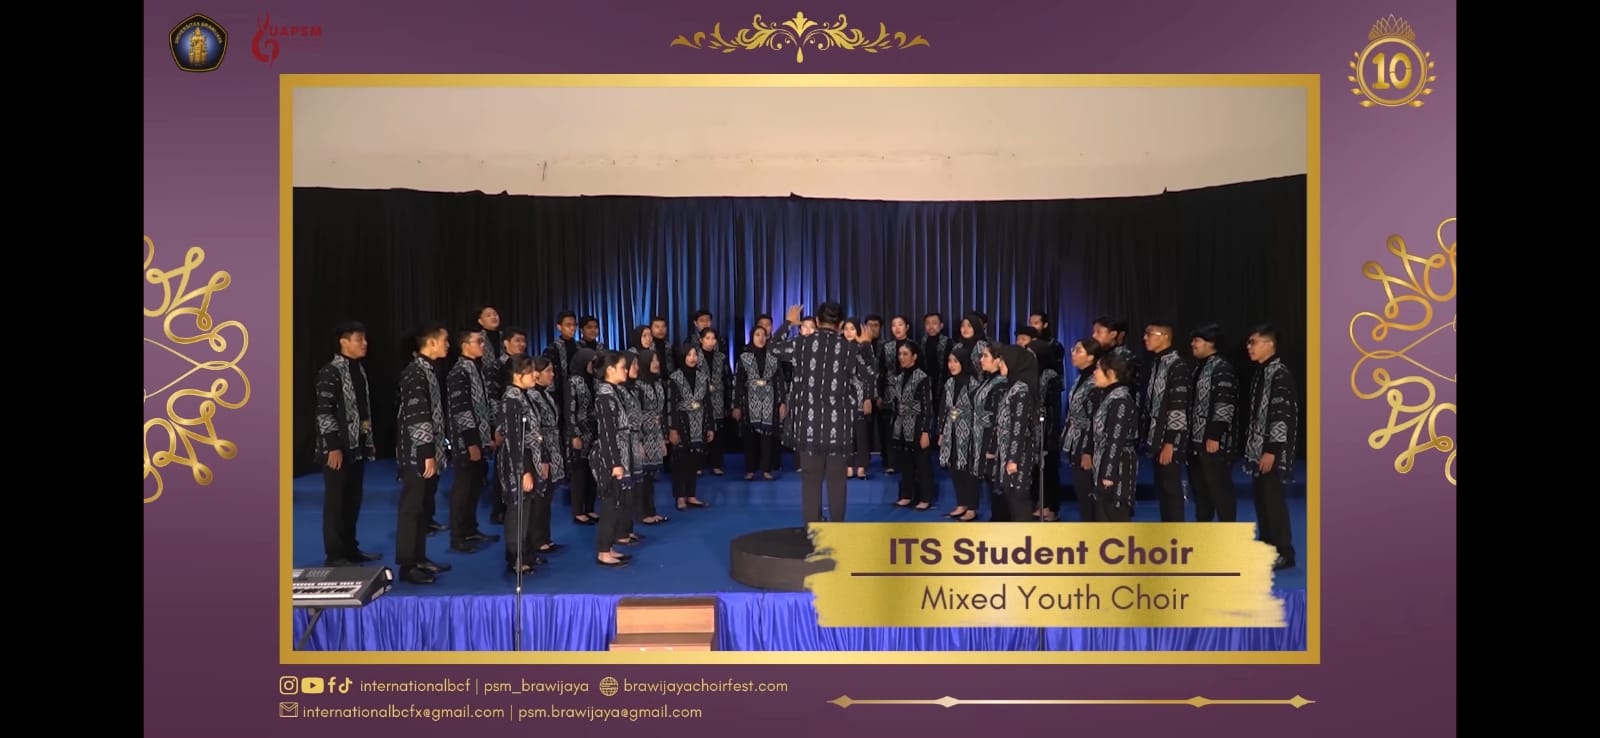 ITS PSM appearance at the International BCF 2022 for the Mixed Youth Choir category